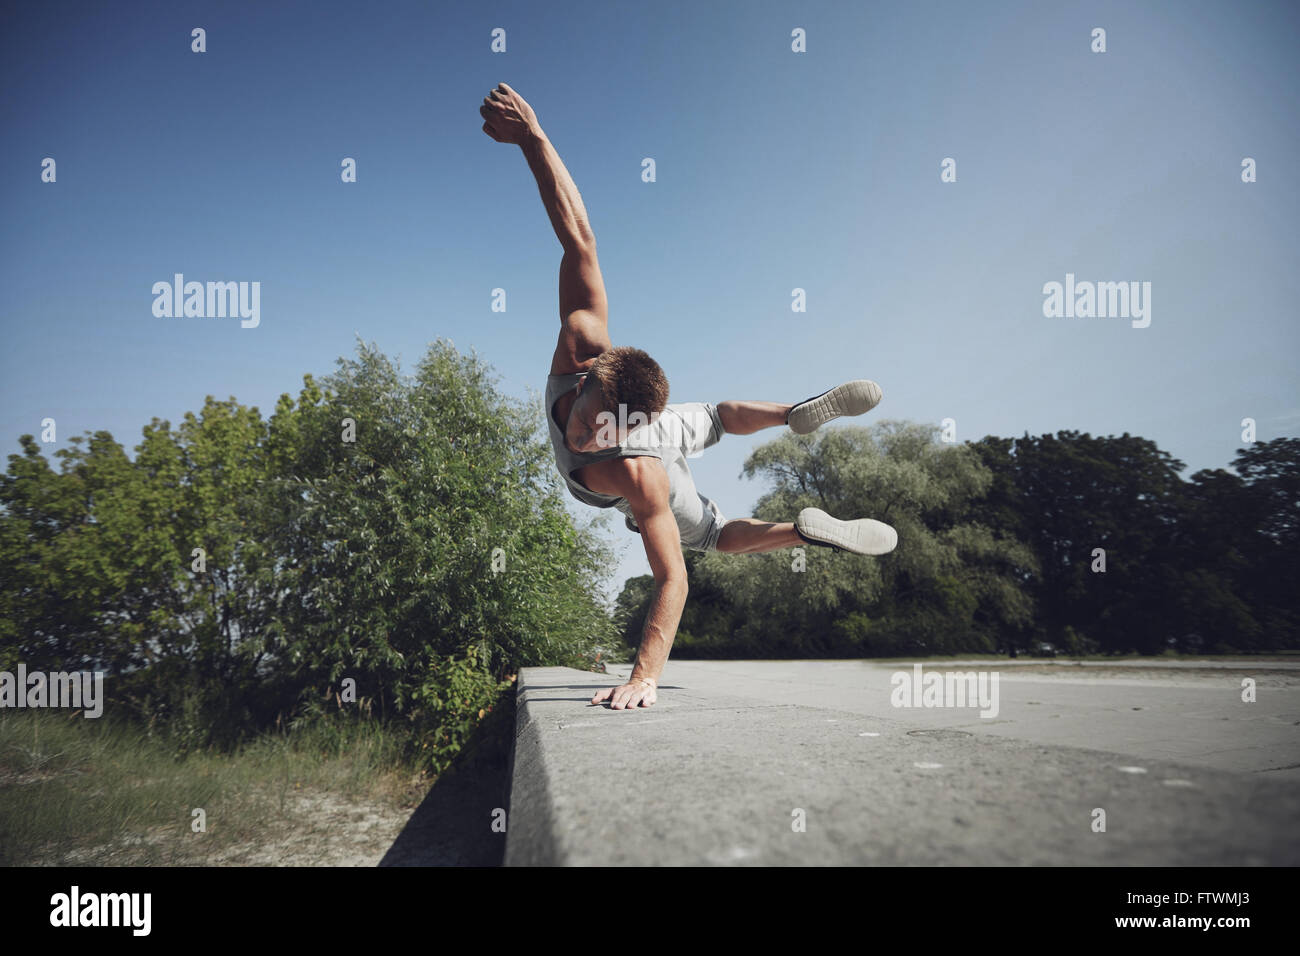 sporty young man jumping in summer park Stock Photo